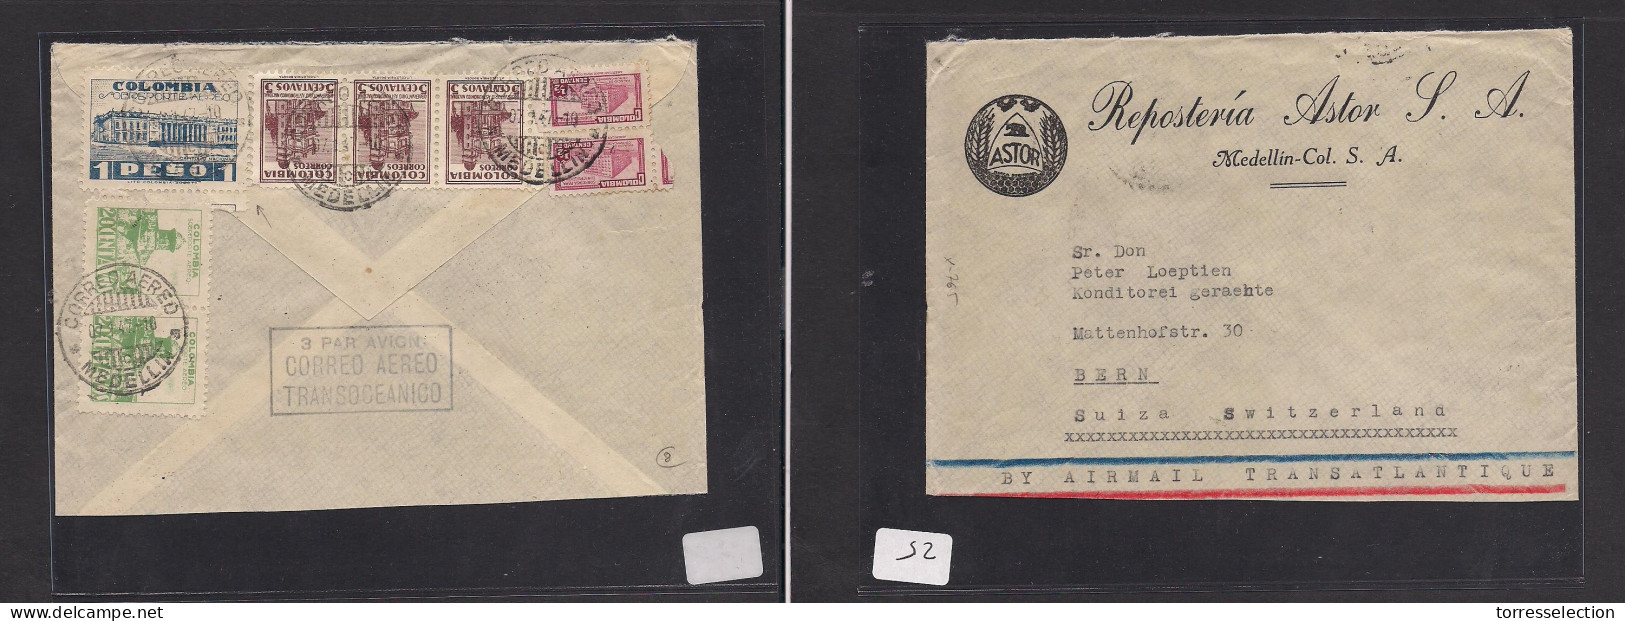 COLOMBIA. Colombia - Cover - 1947 Medellin Switz Bern Mult Fkd Env Airmail Nr. 3 Transoceanico. Easy Deal. XSALE. - Colombia